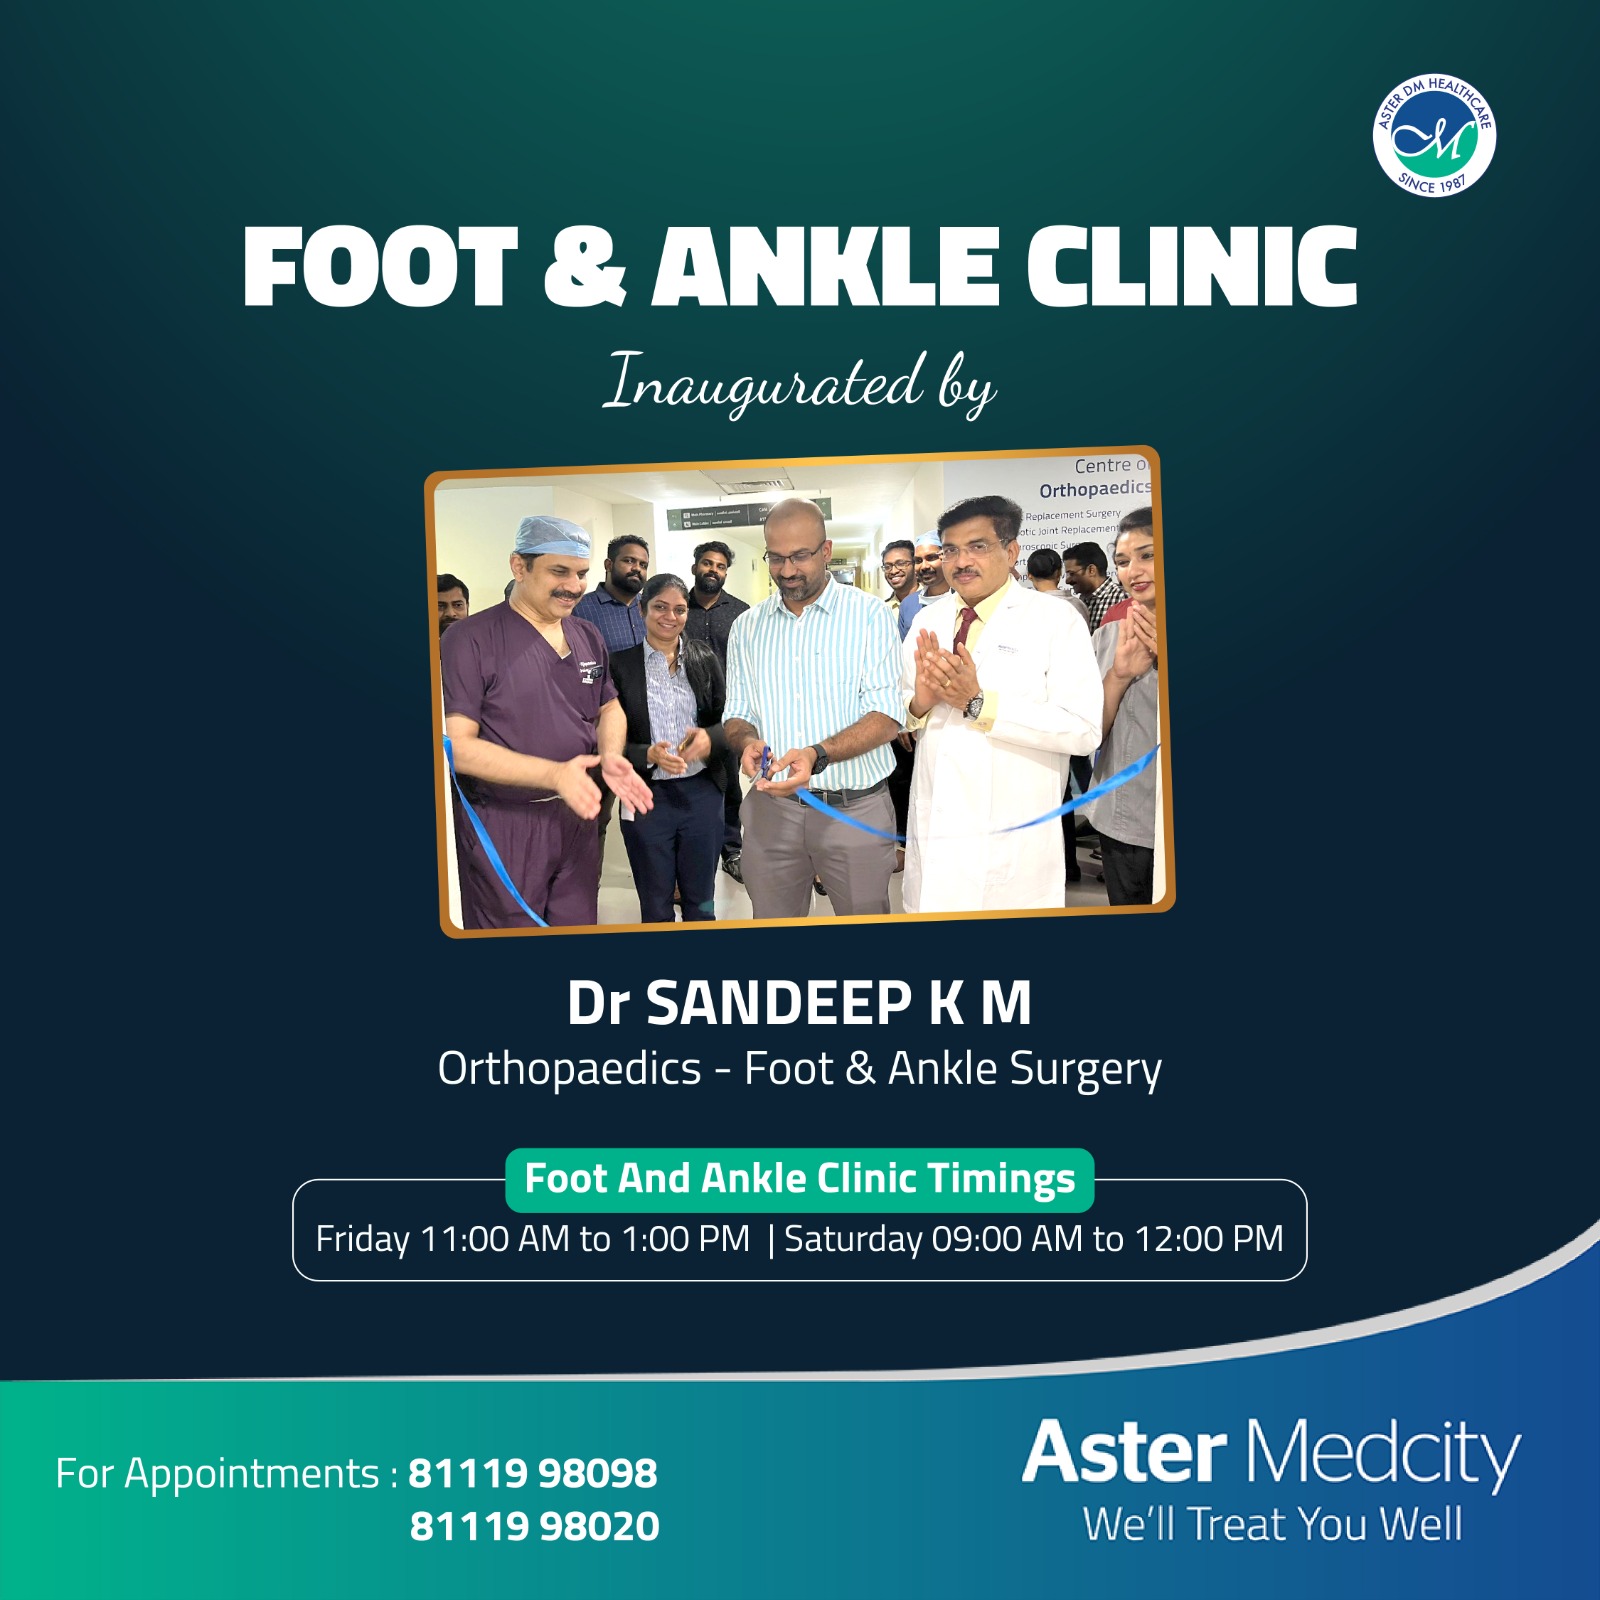  "Stepping Forward: Inauguration of the Foot and Ankle Clinic at Aster Medcity"